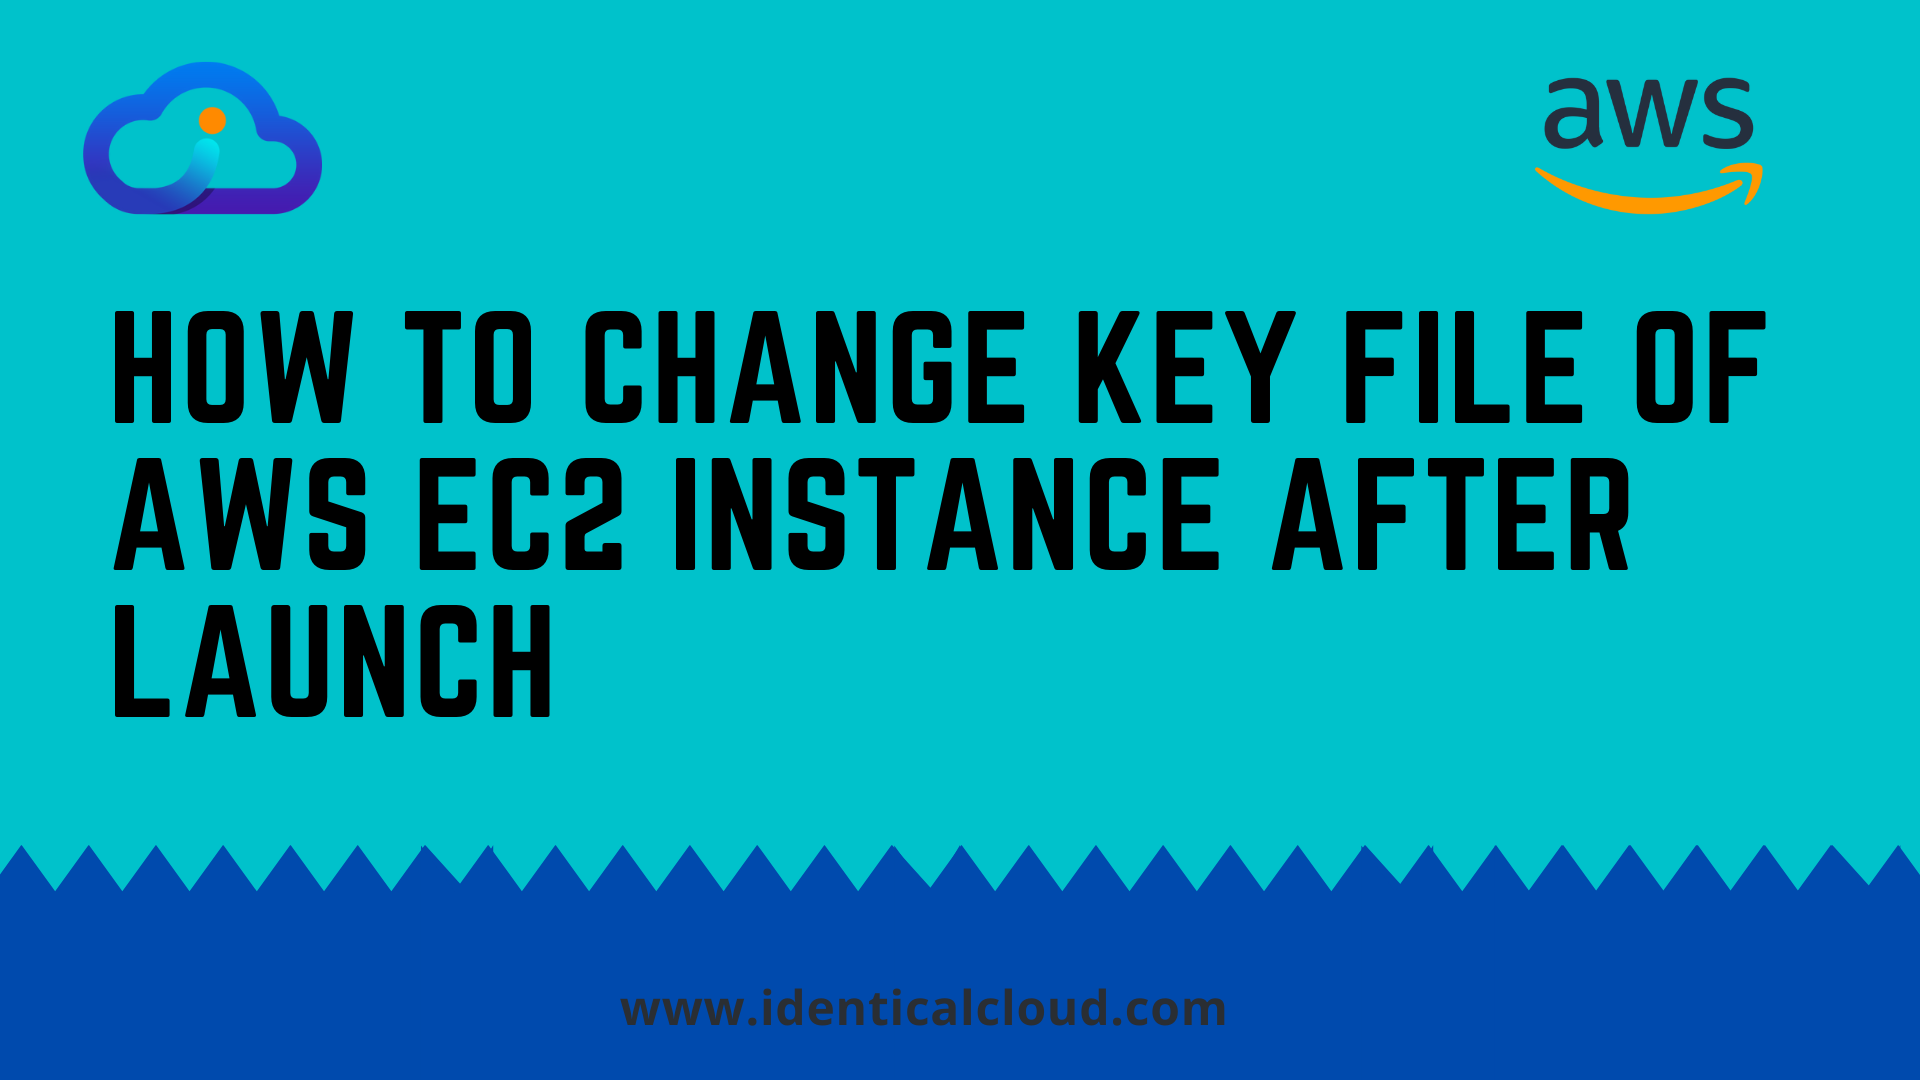 How to change key file of AWS EC2 instance after launch - IdenticalCloud